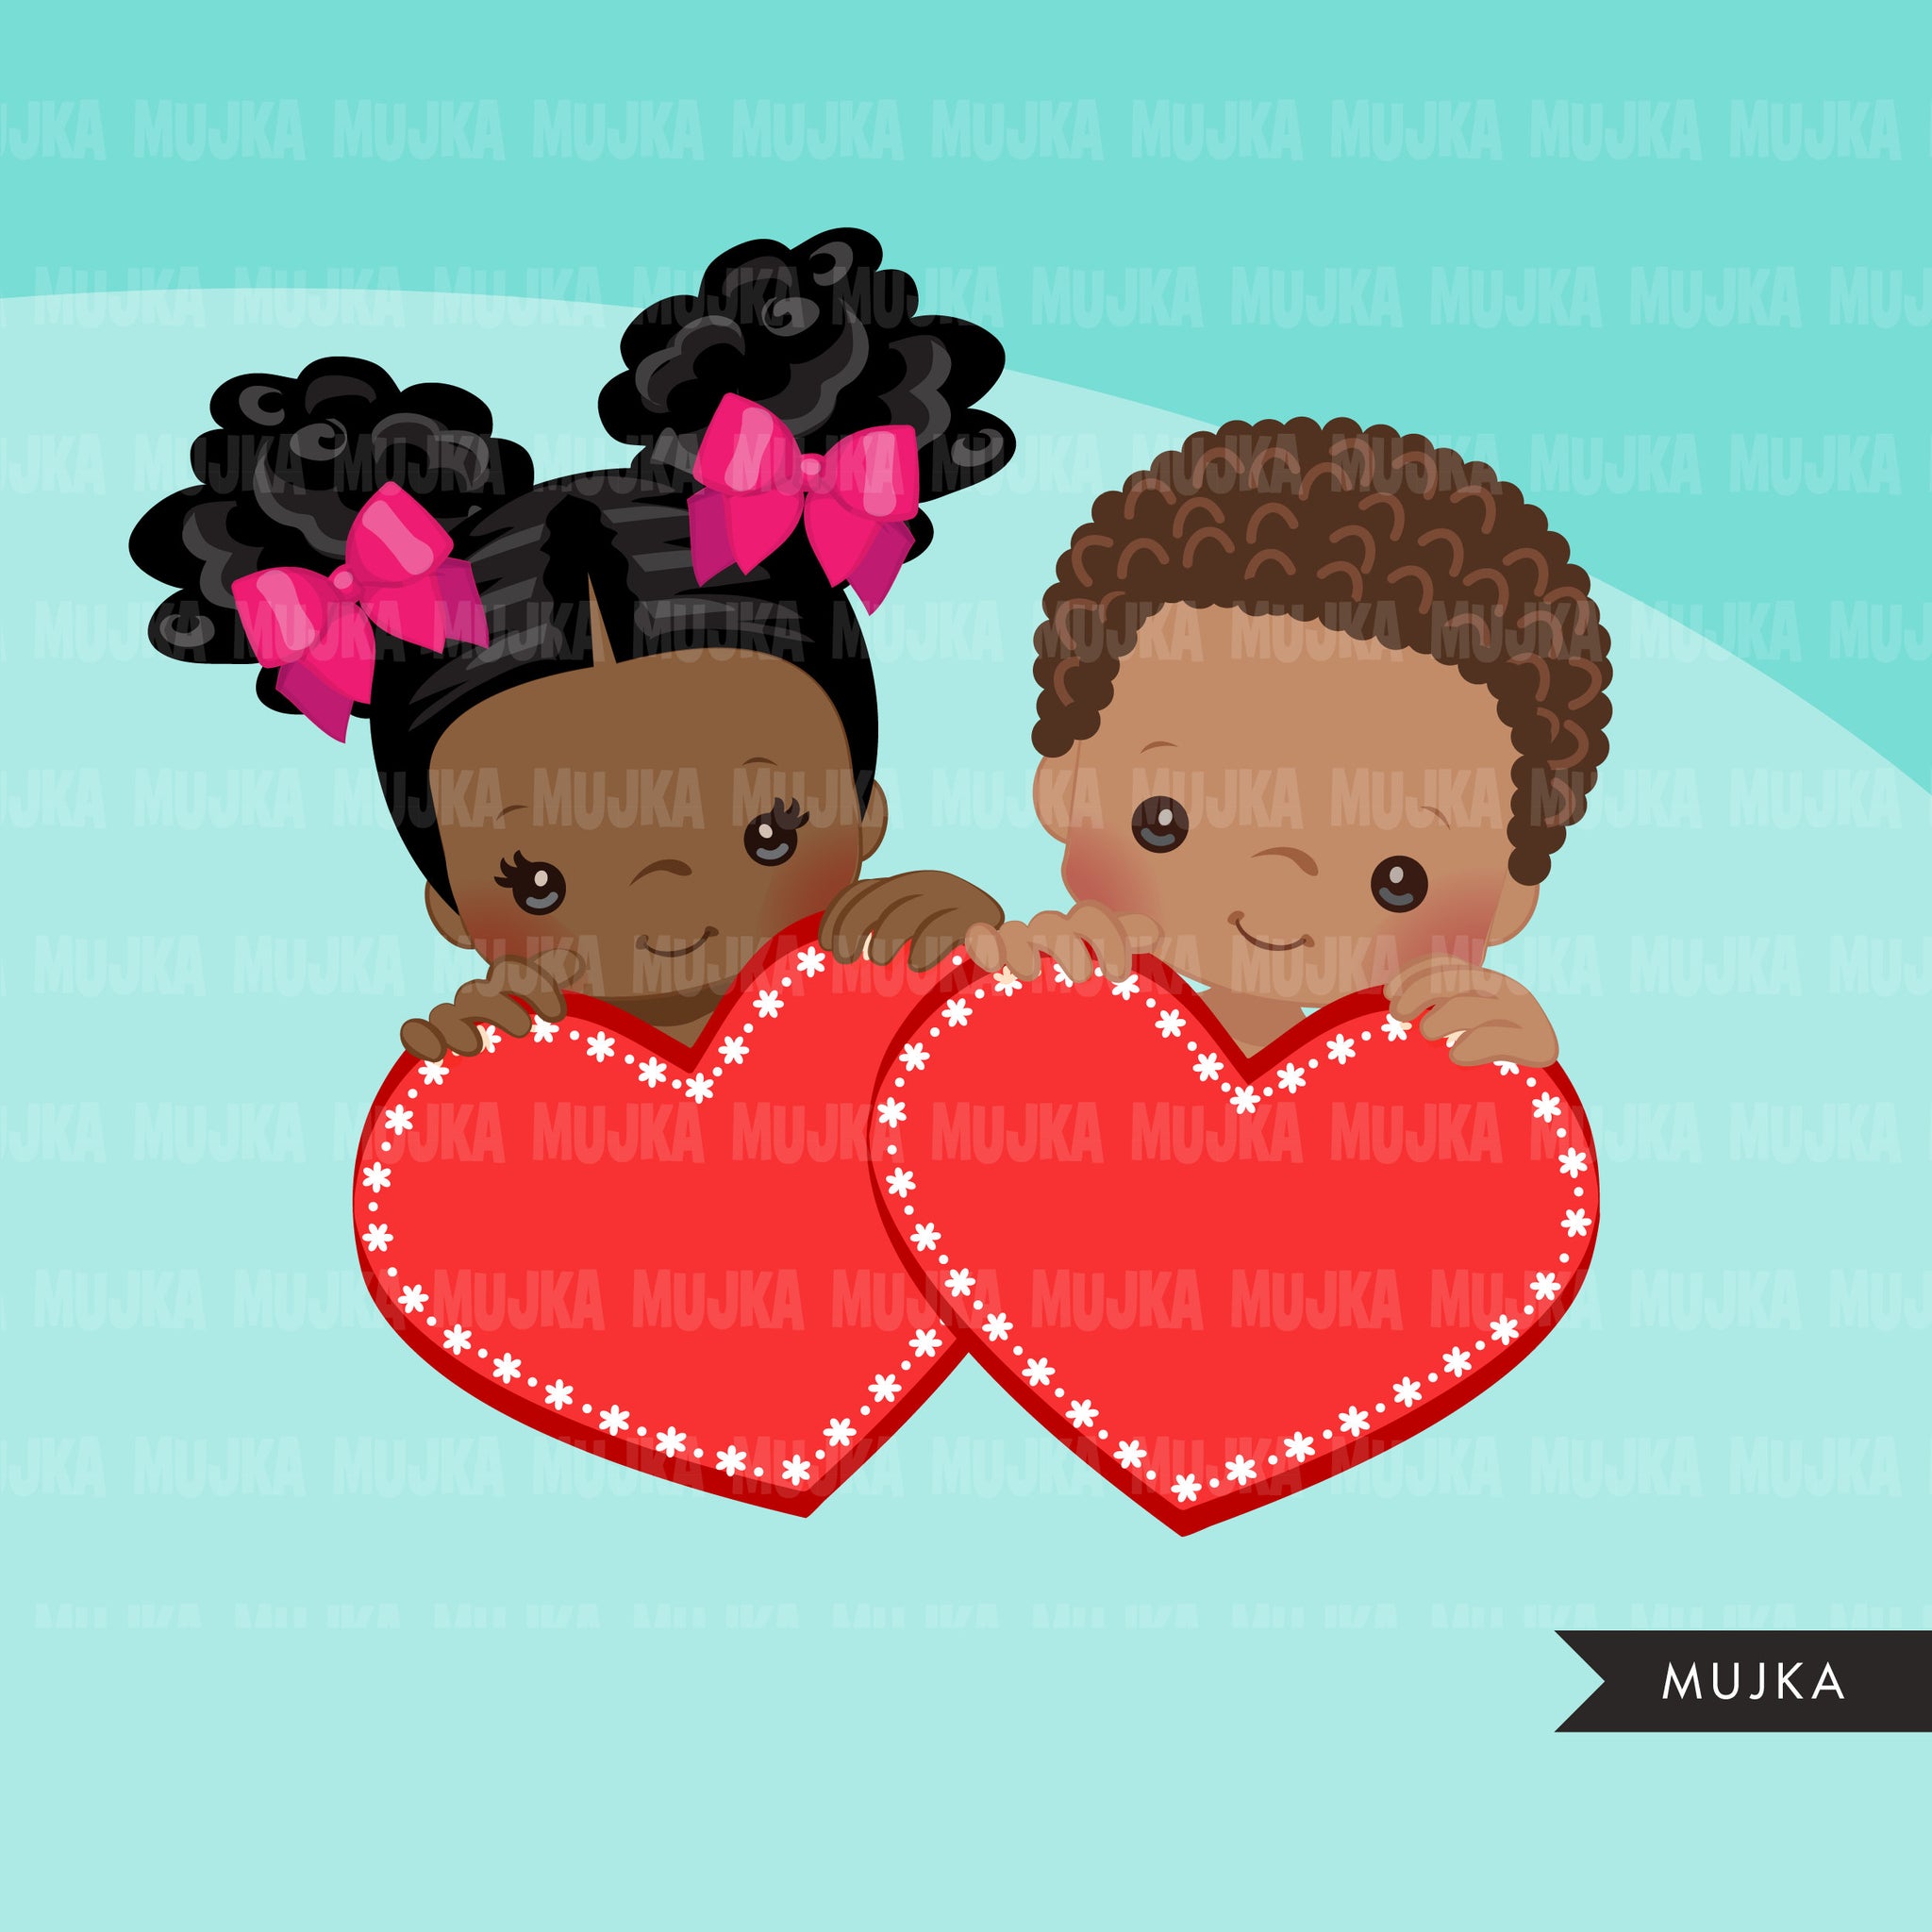 Valentine Clipart, peeking kids BUNDLE, Valentine's Day boys, girls, valentine gifts, commercial use graphics, png clip art